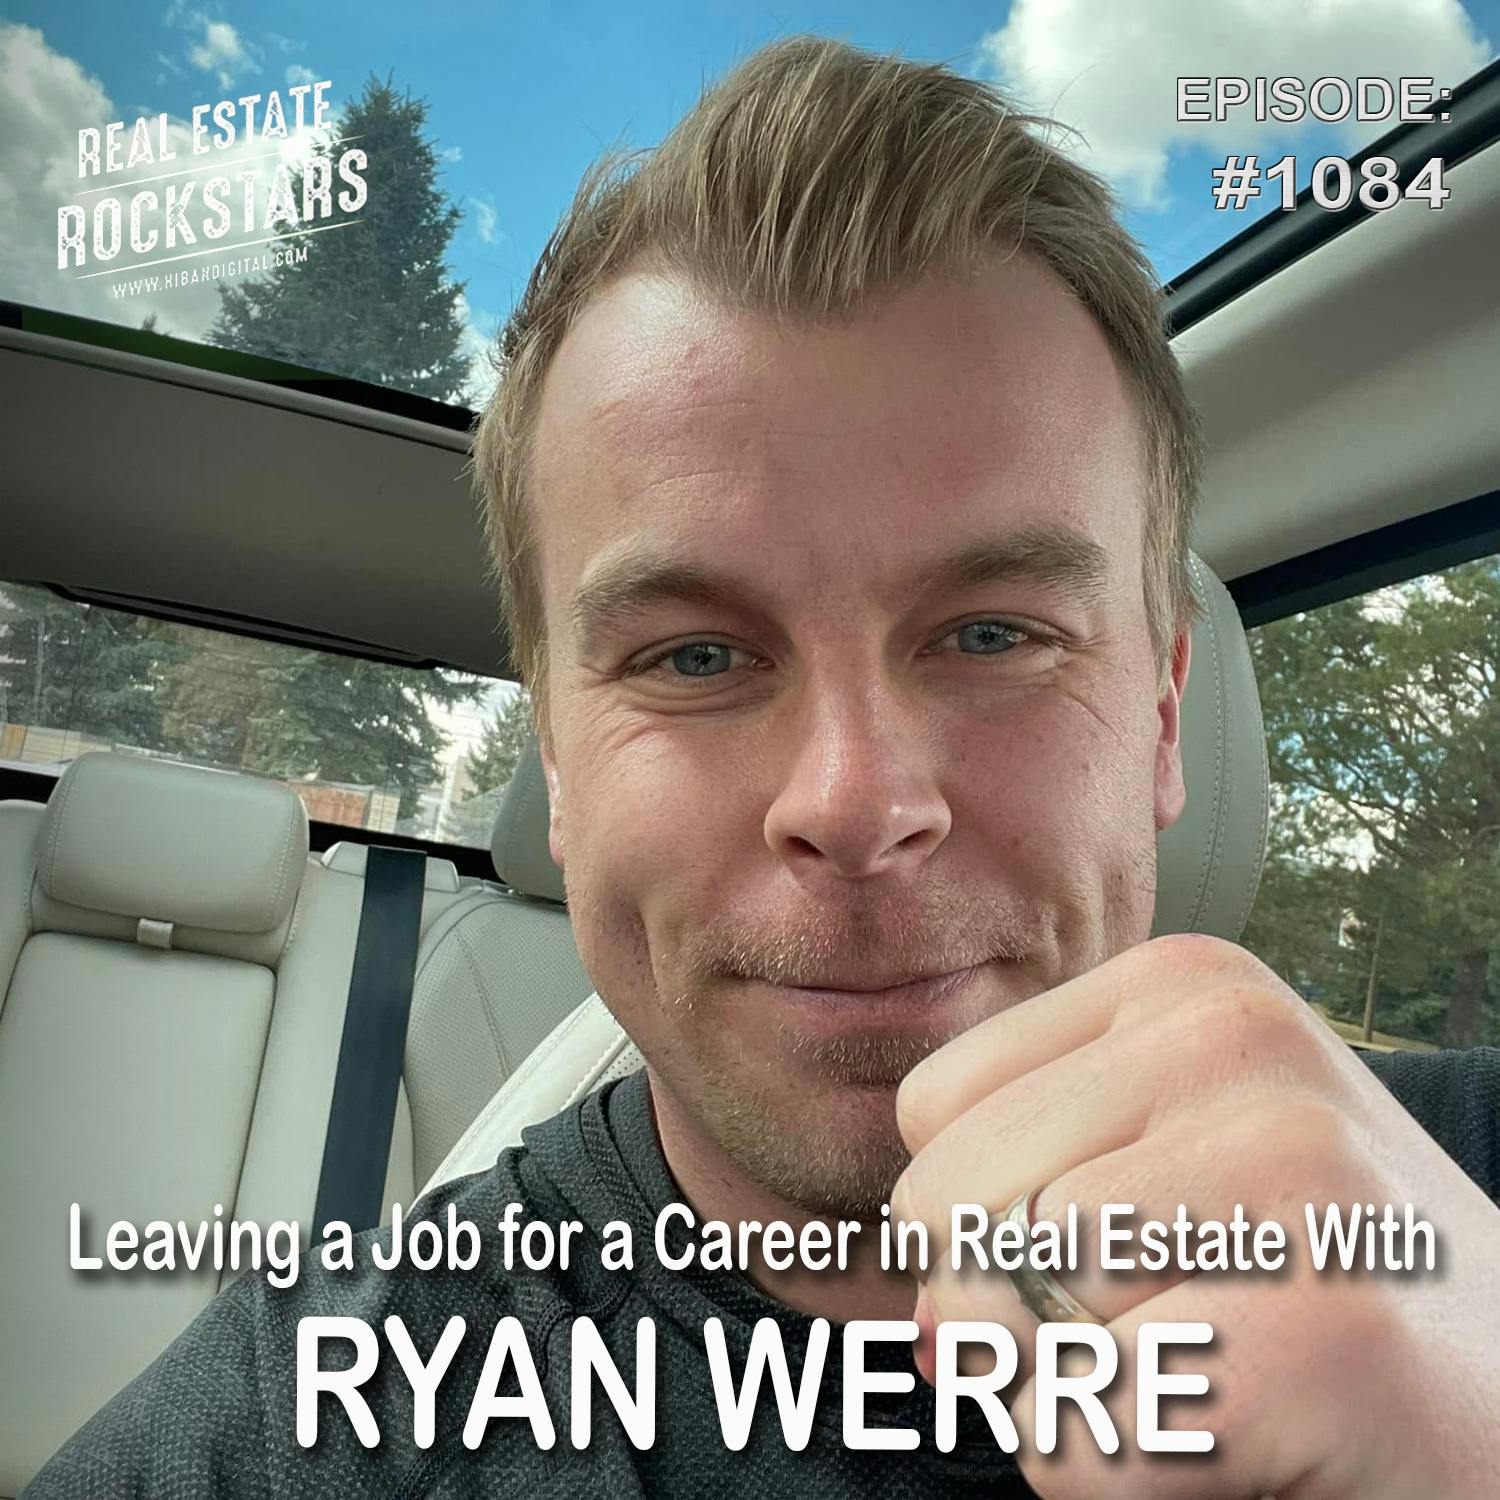 1084: Leaving a Job for a Career in Real Estate With Ryan Werre